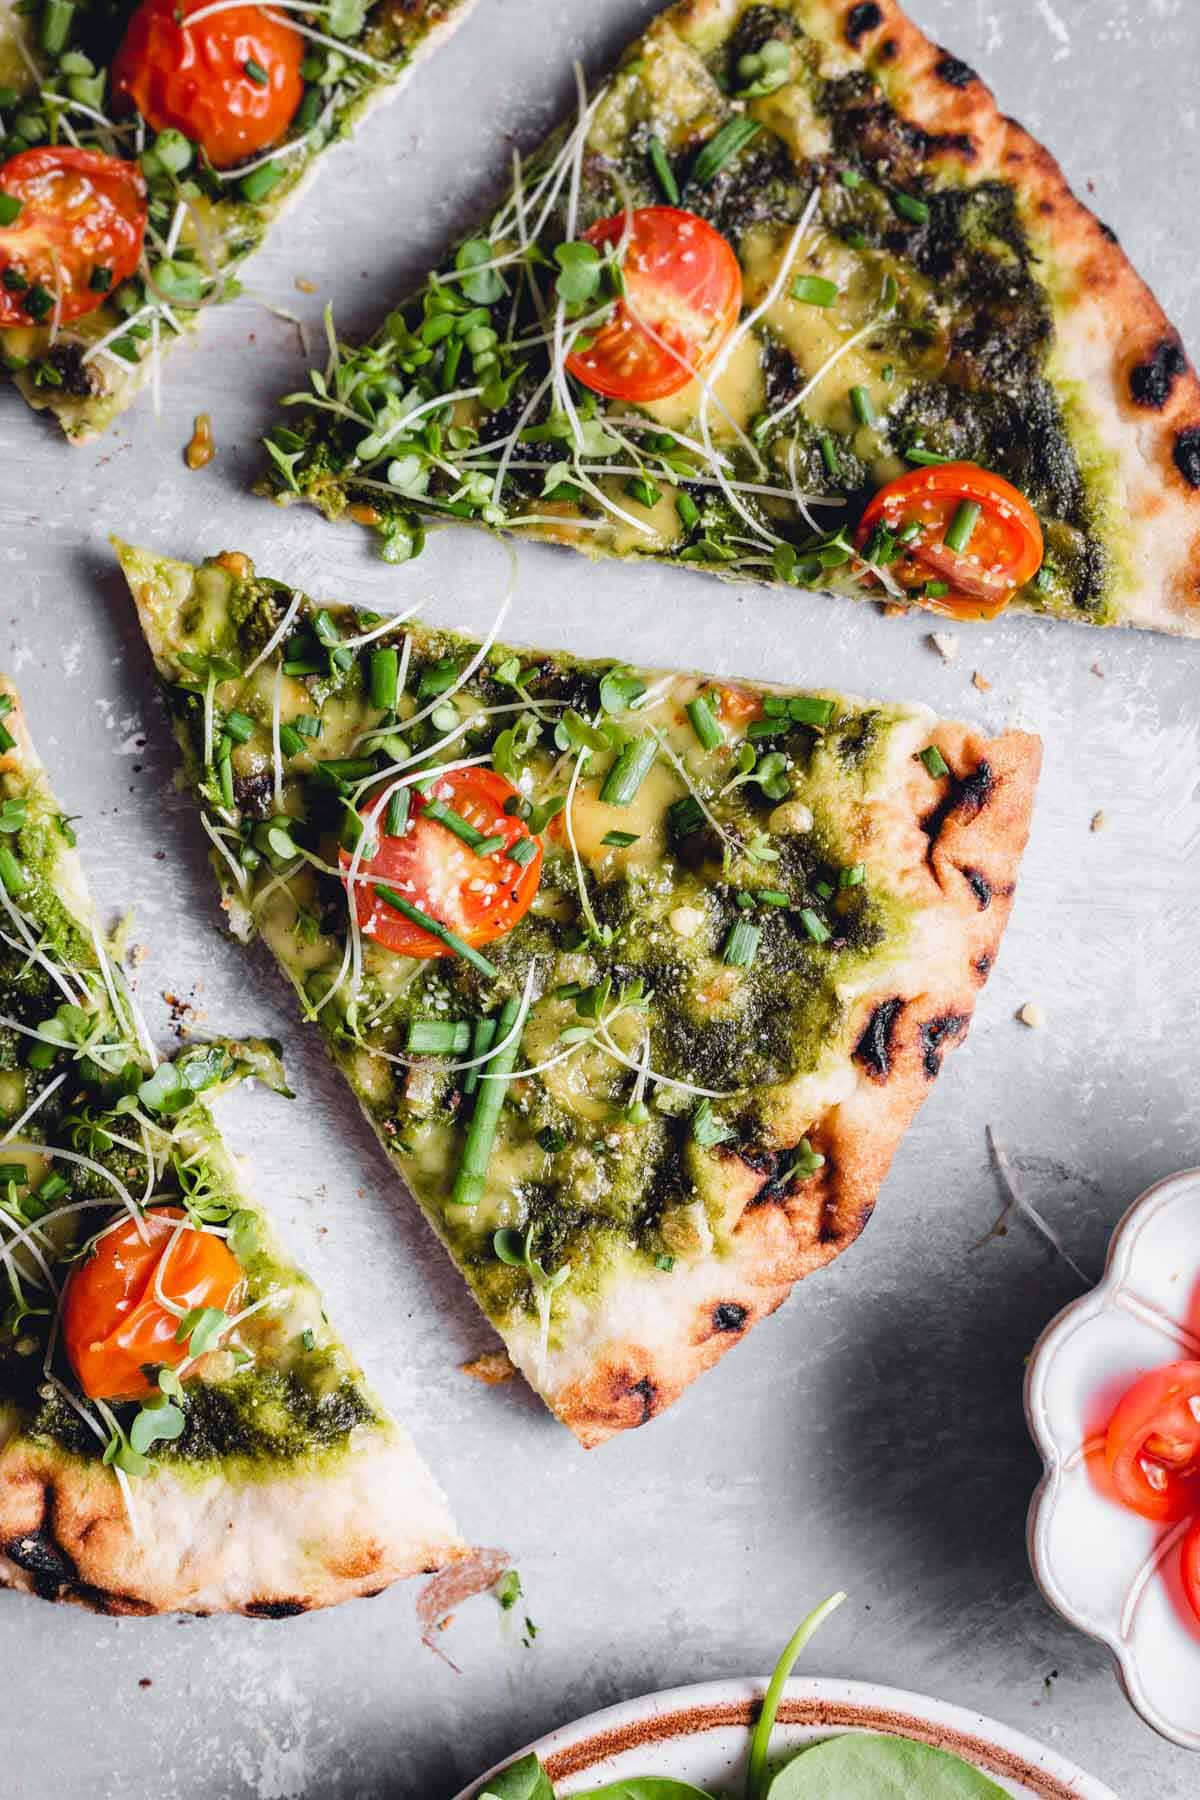 Slices of green pizza on a flat grey surface.